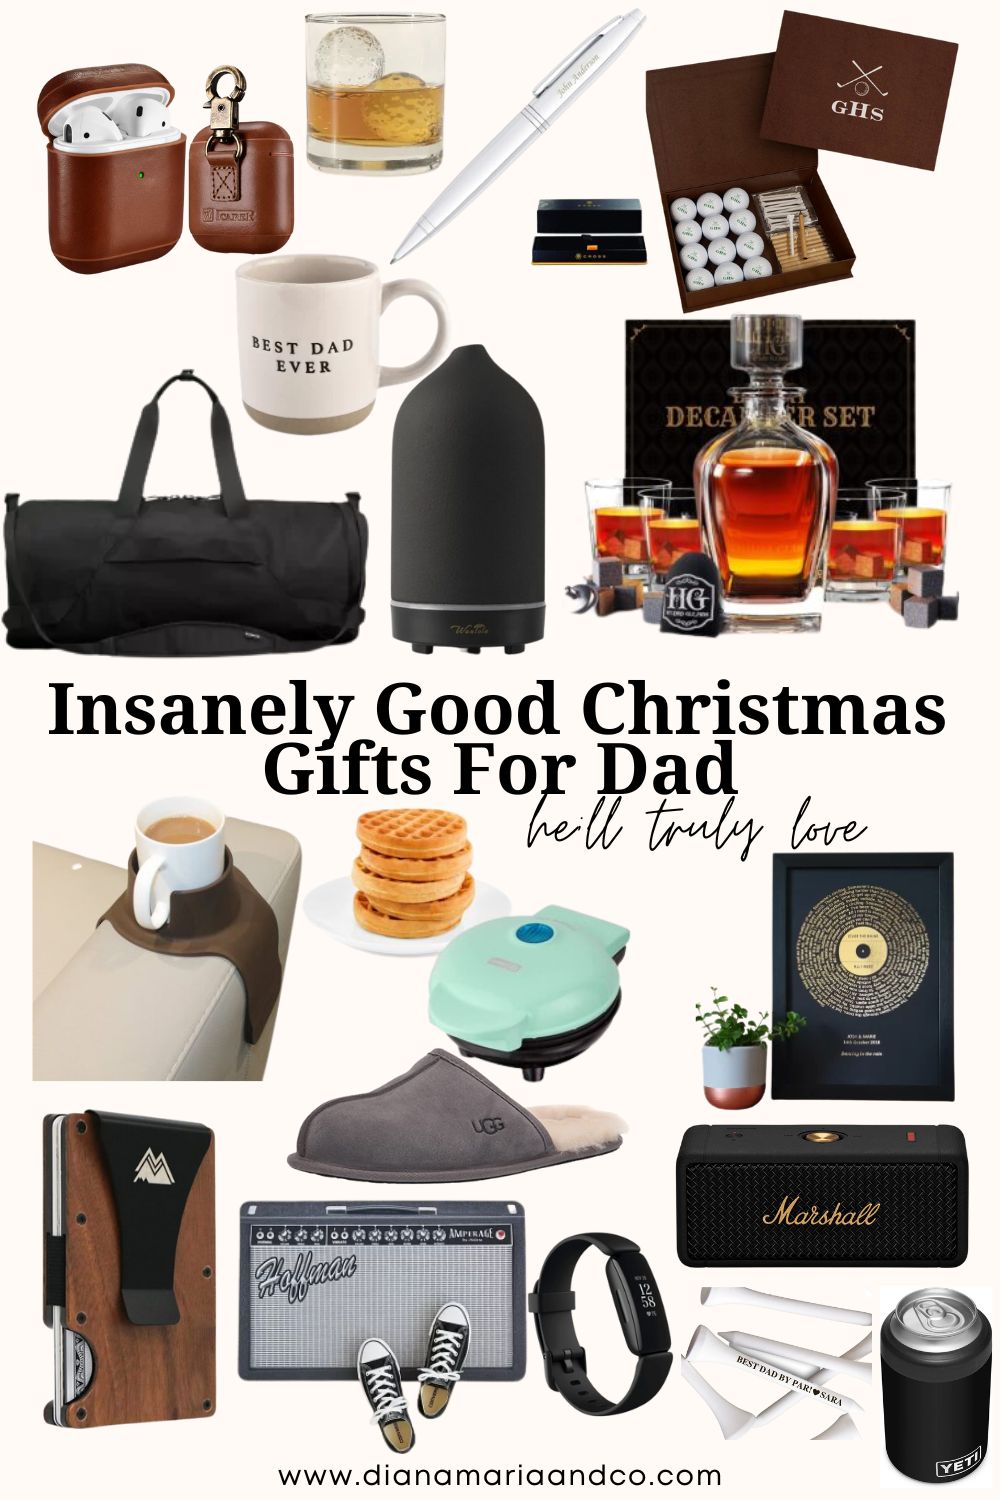 Insanely Good Christmas Gifts For Dad Diana Maria & Co